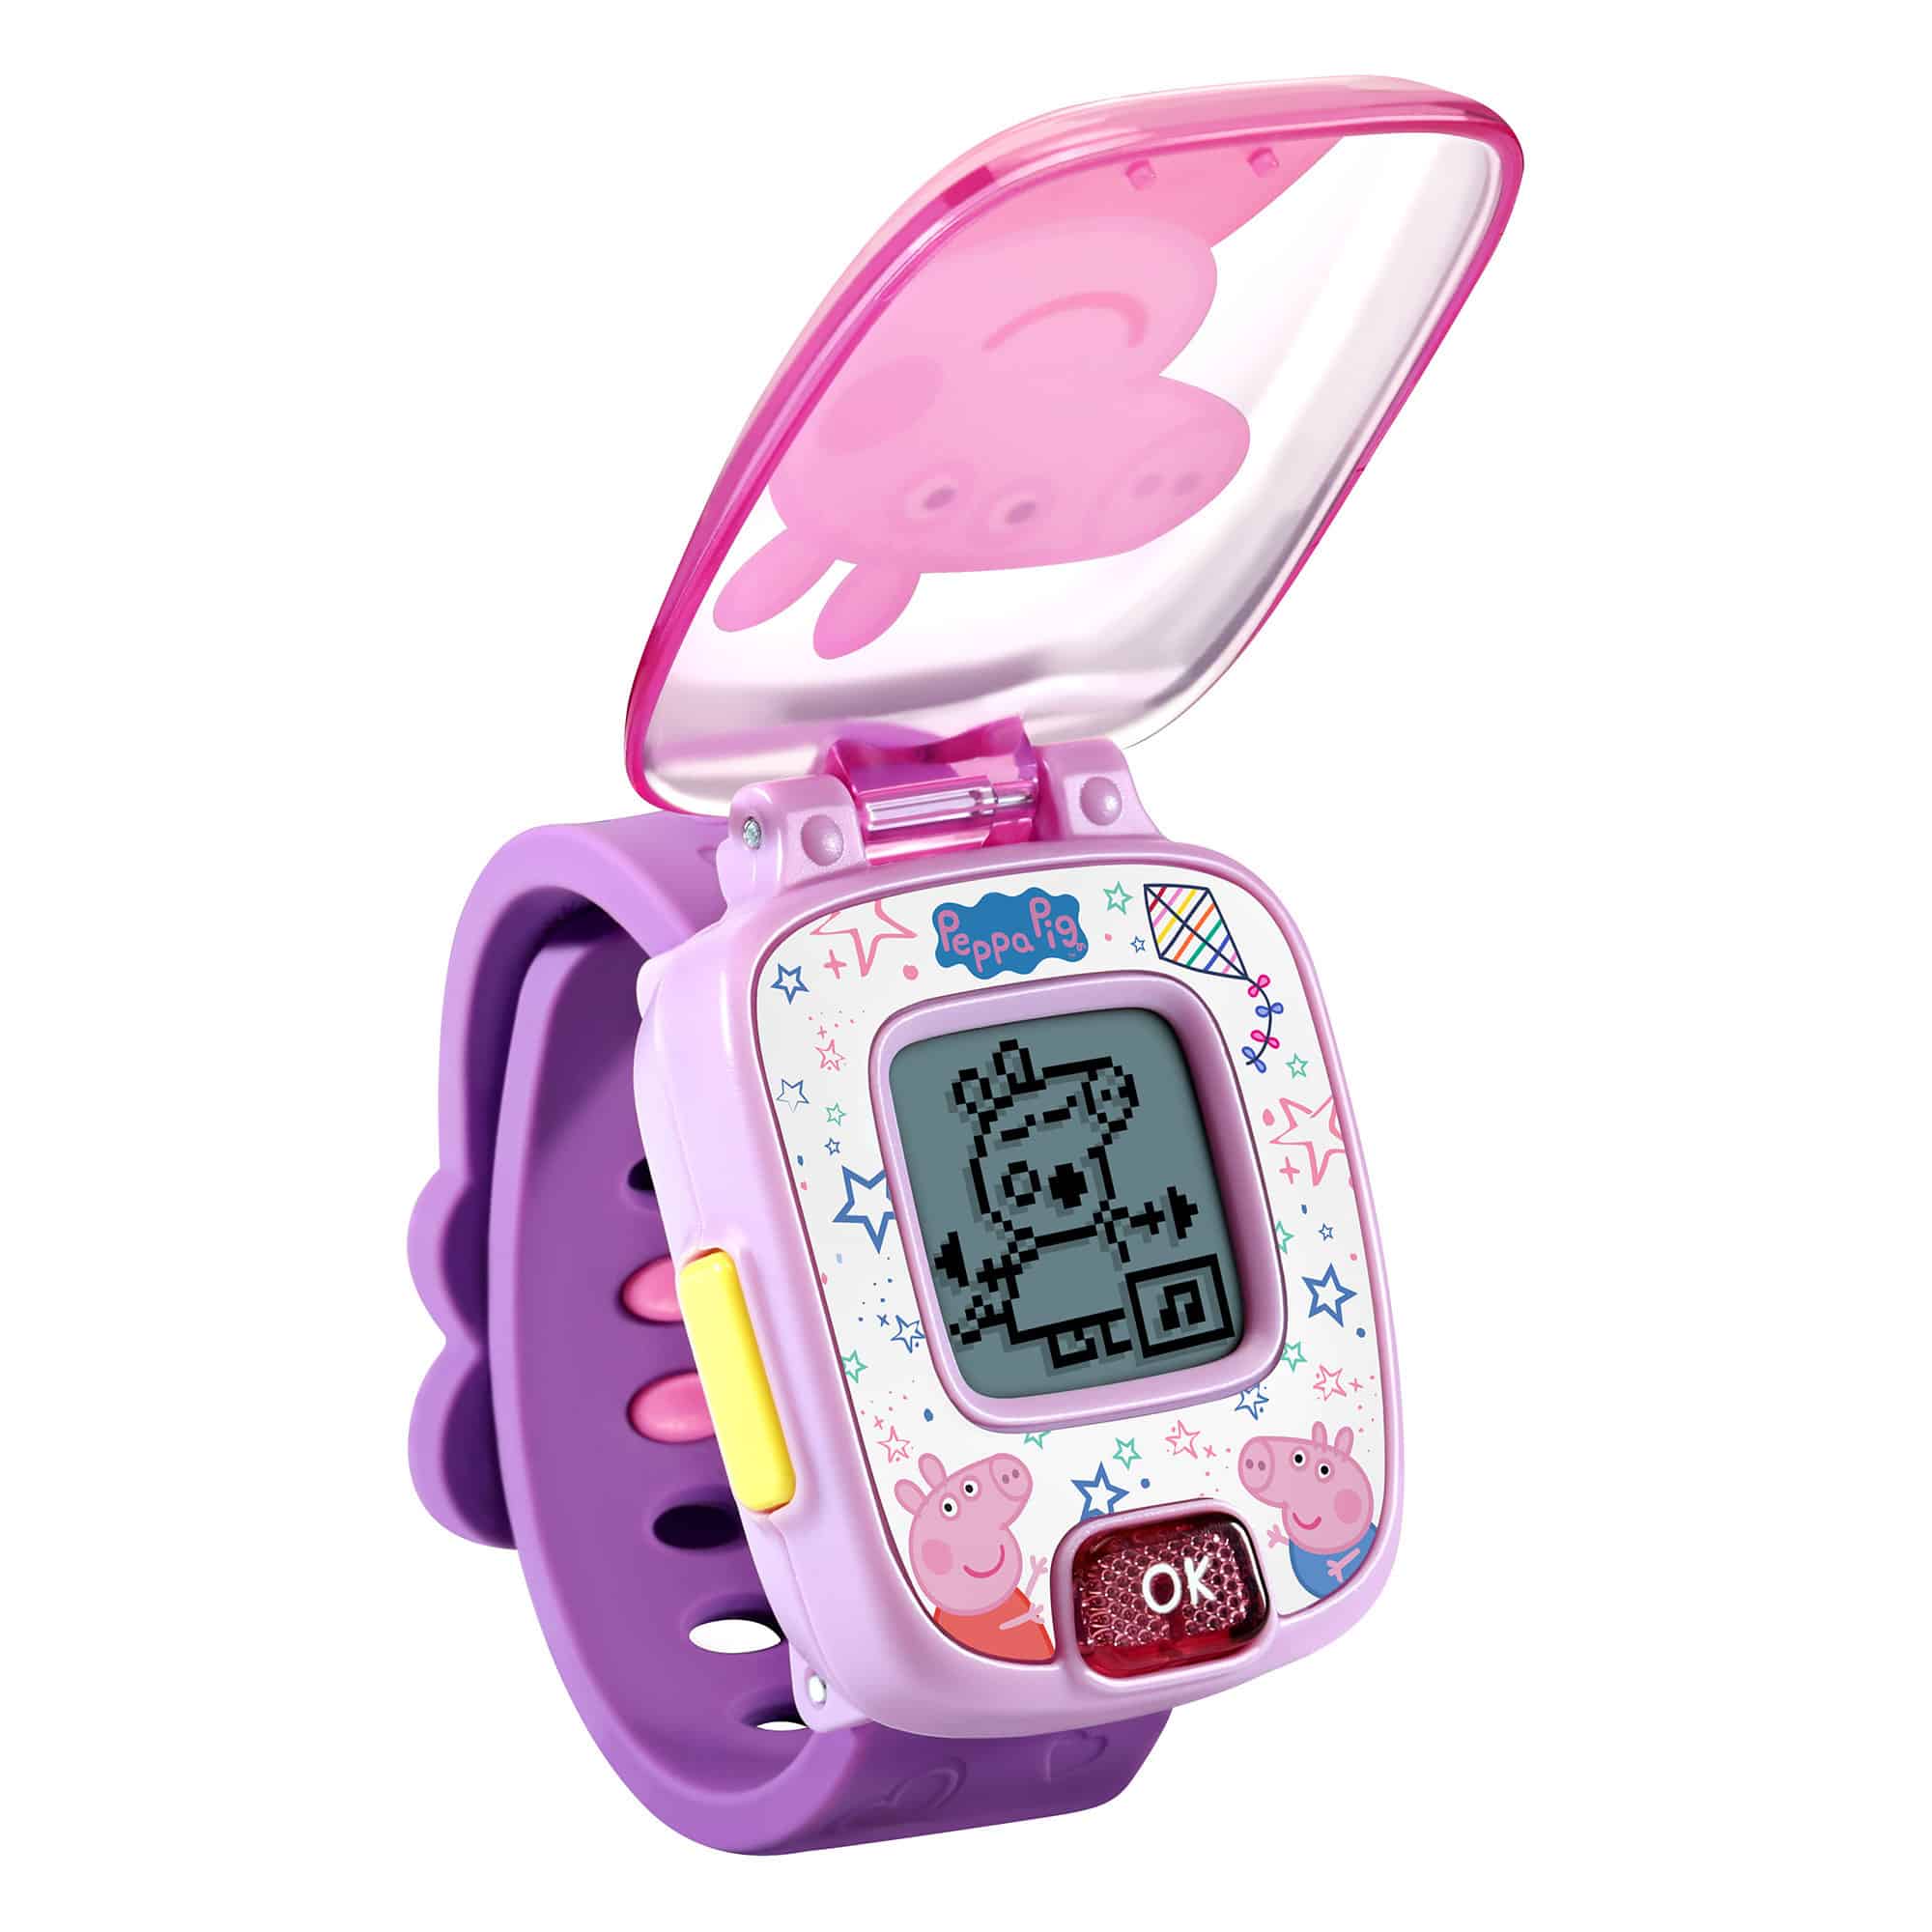 Vtech - Pappa Pig Learning Learning Watch